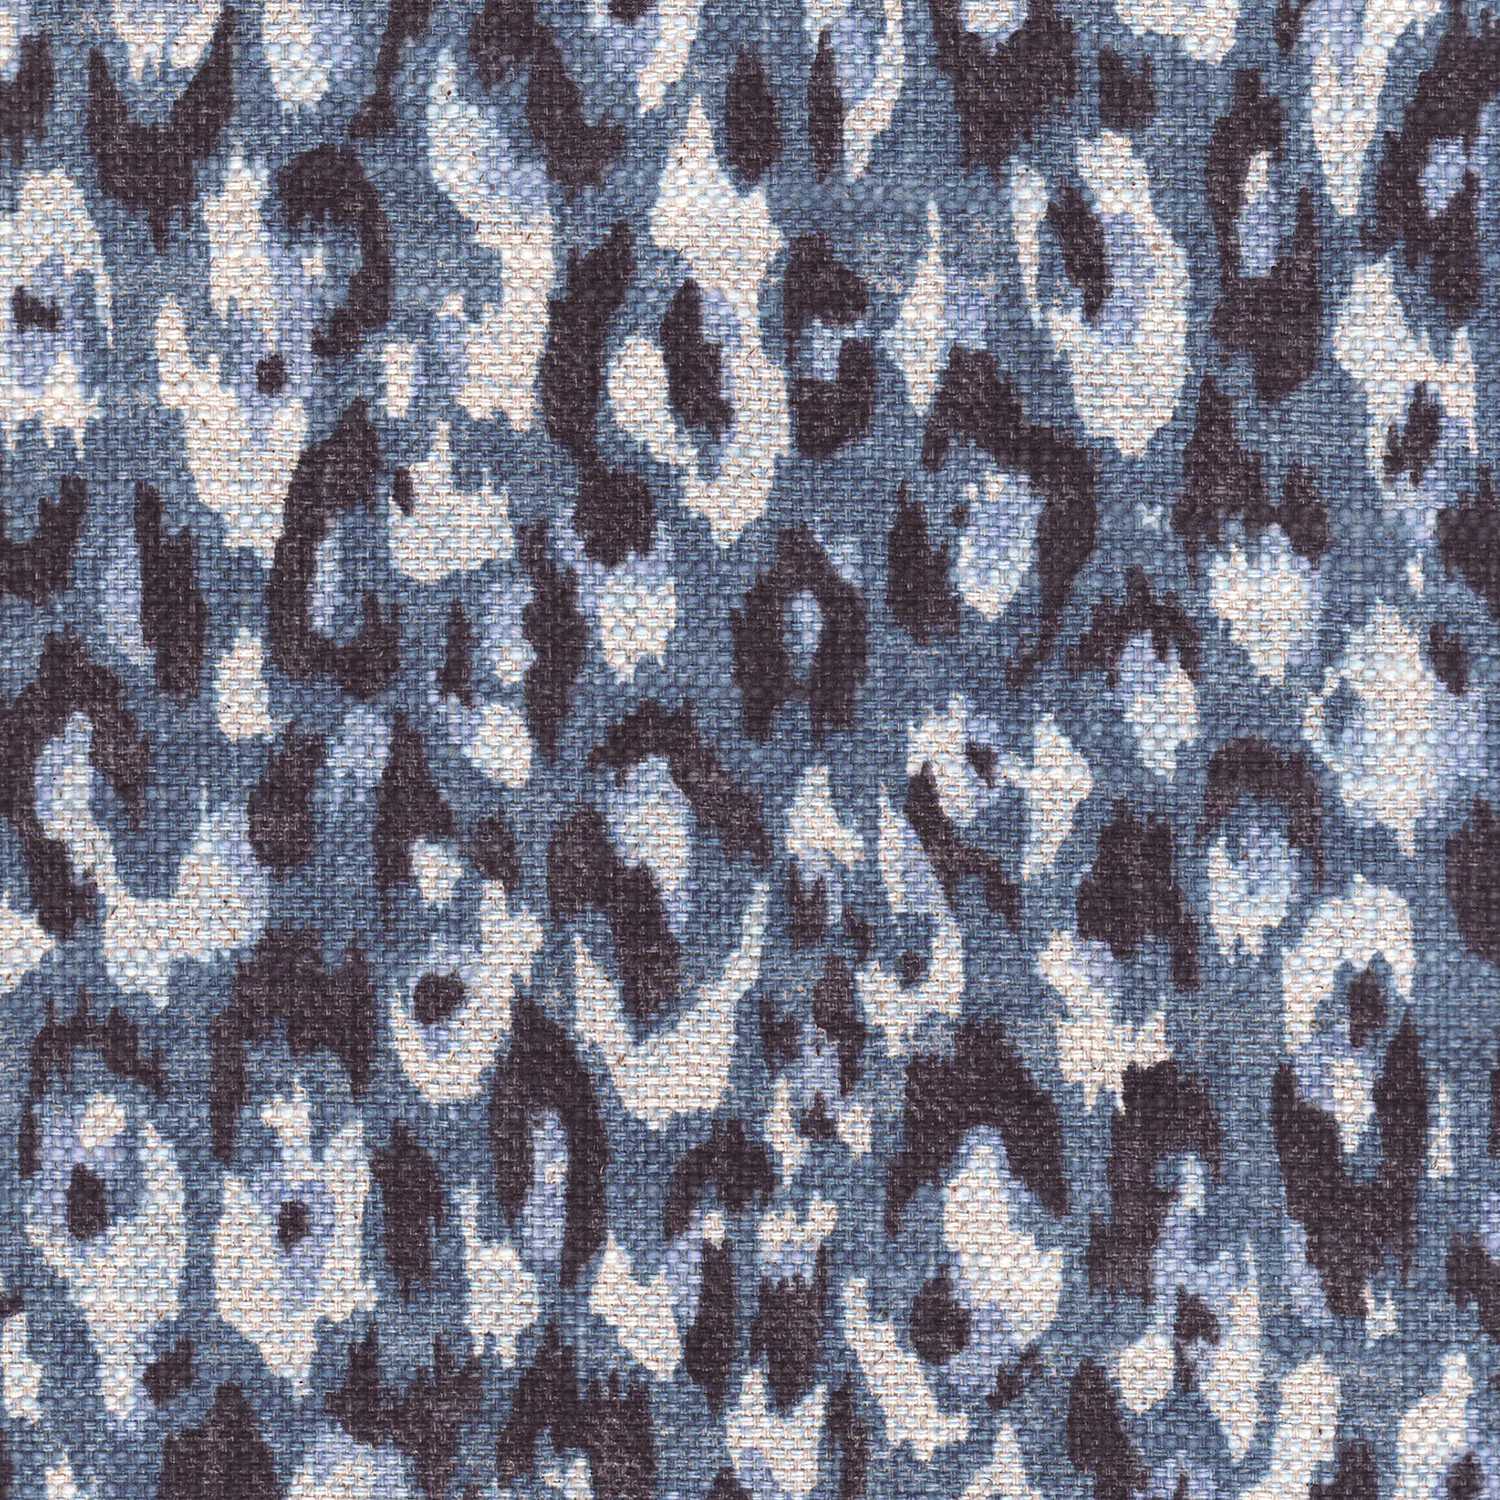 P-CHEETAH/BLUE - Prints Fabric Suitable For Drapery